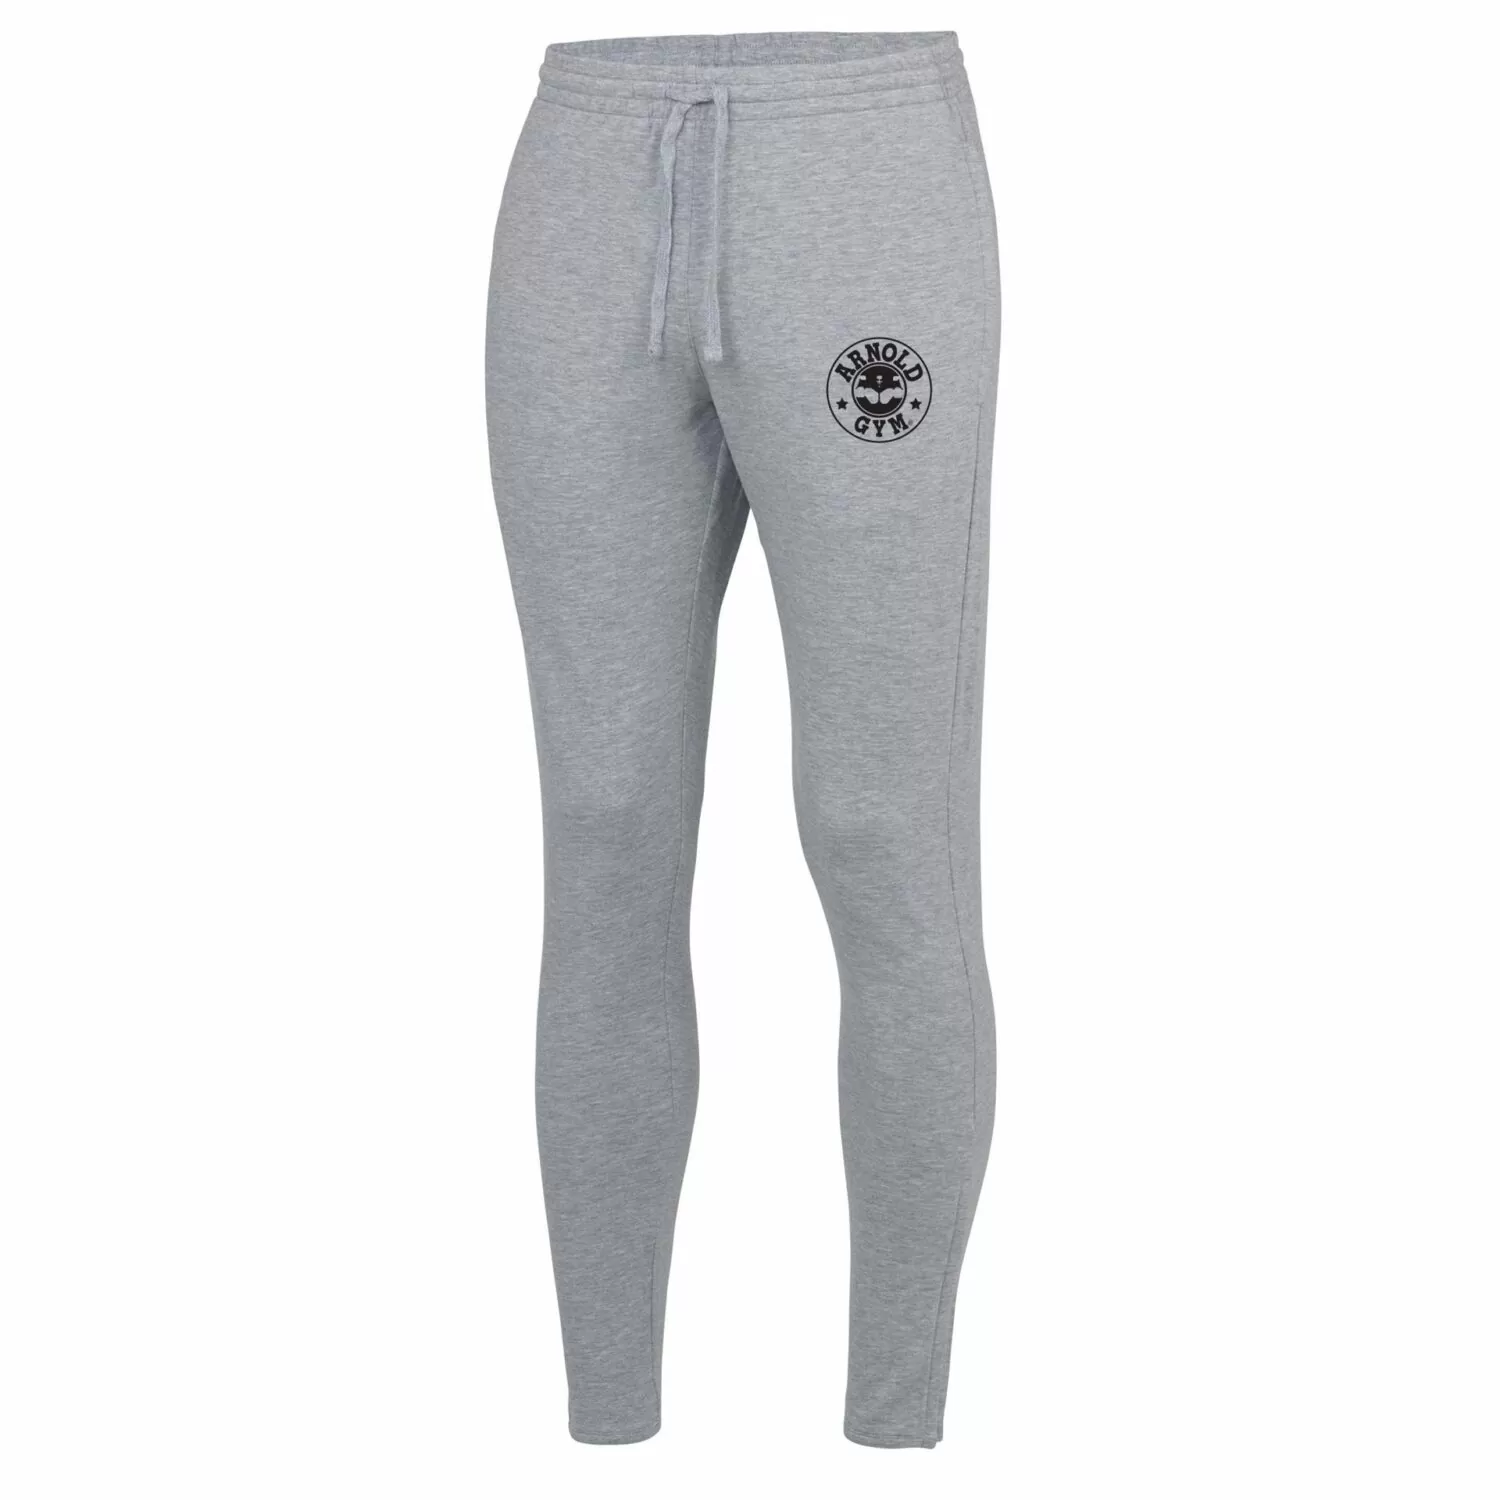 Men's Fitness Gym Joggers, Arnold Gym Workout Pants